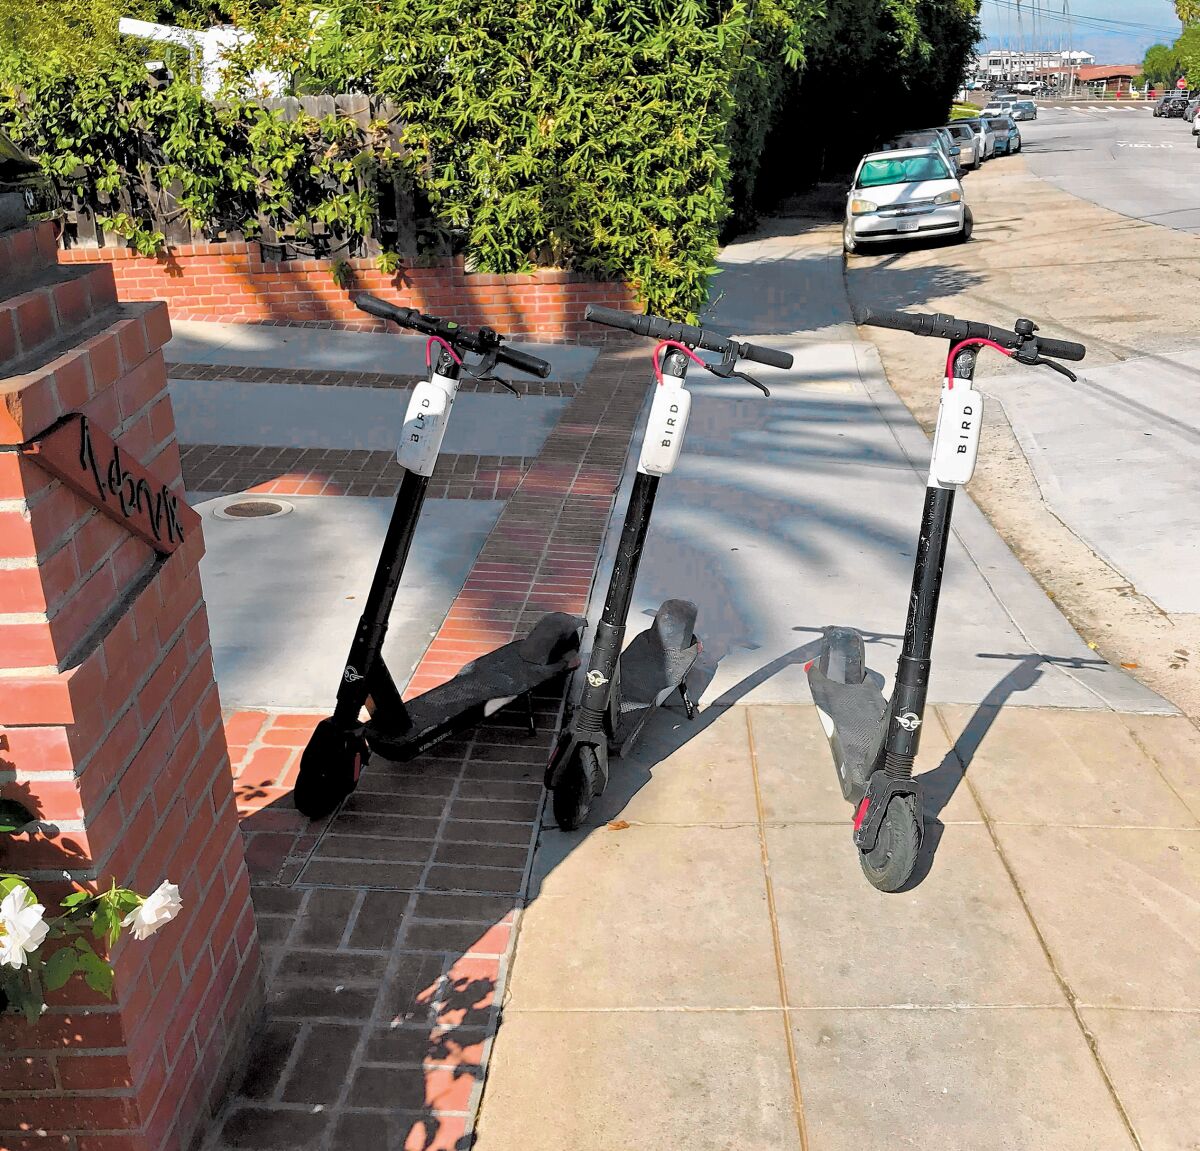 Scooter blockade: This photograph was taken on Saturday morning, Oct. 26, 2019 near my house on the 7800 block of Exchange Place. The sidewalk is completely blocked by these electric scooters. Isn’t this against the law? — Guido Baccaglini